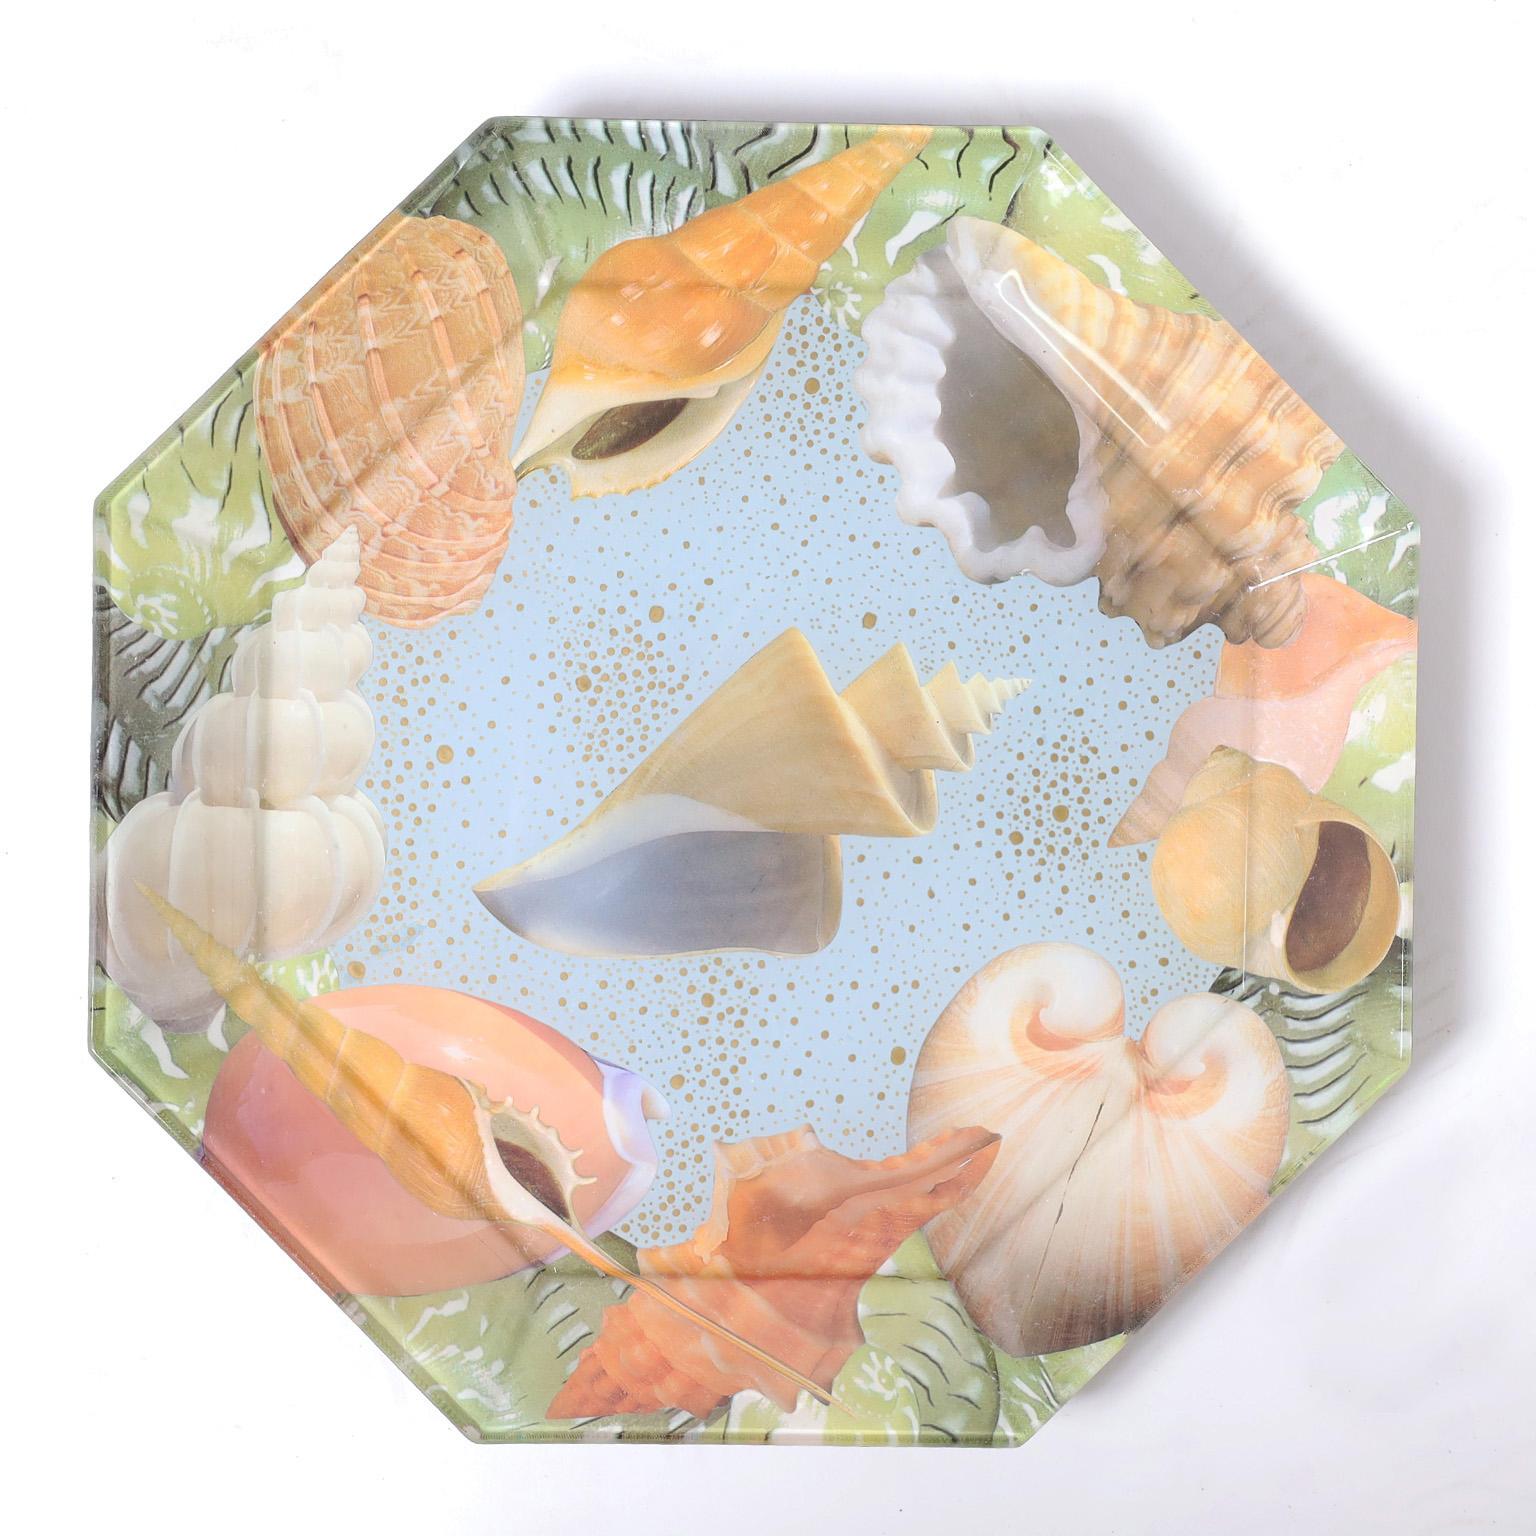 Eye catching set of ten glass plates with an octagon form decorated with seashells in a whimsical reverse decoupage technique.